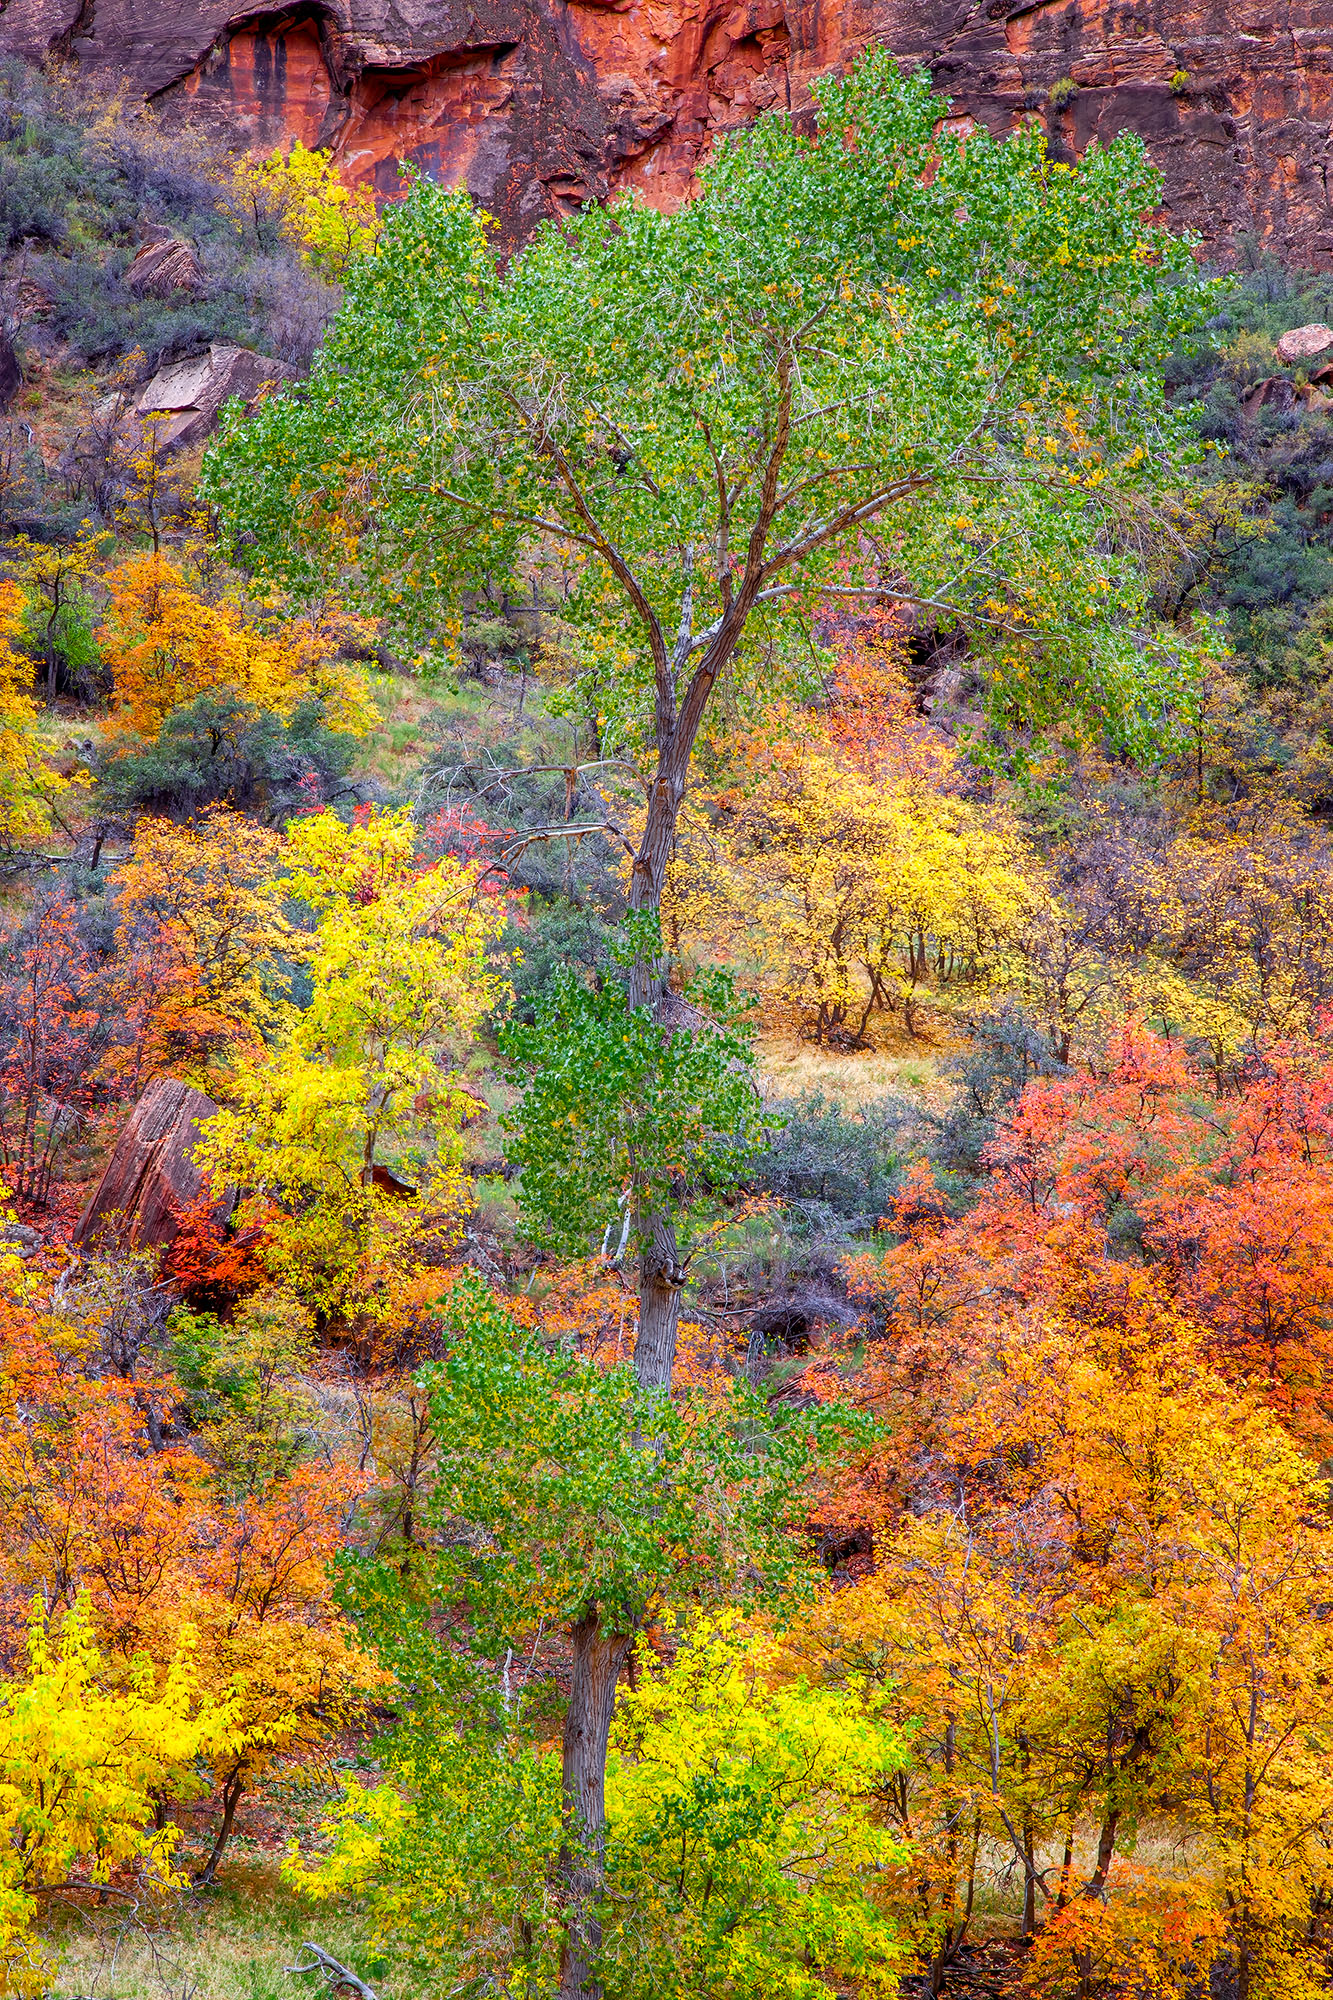 Amidst the vibrant hues of fall in Zion National Park, this vertical image showcases a resilient cottonwood tree in green. It...